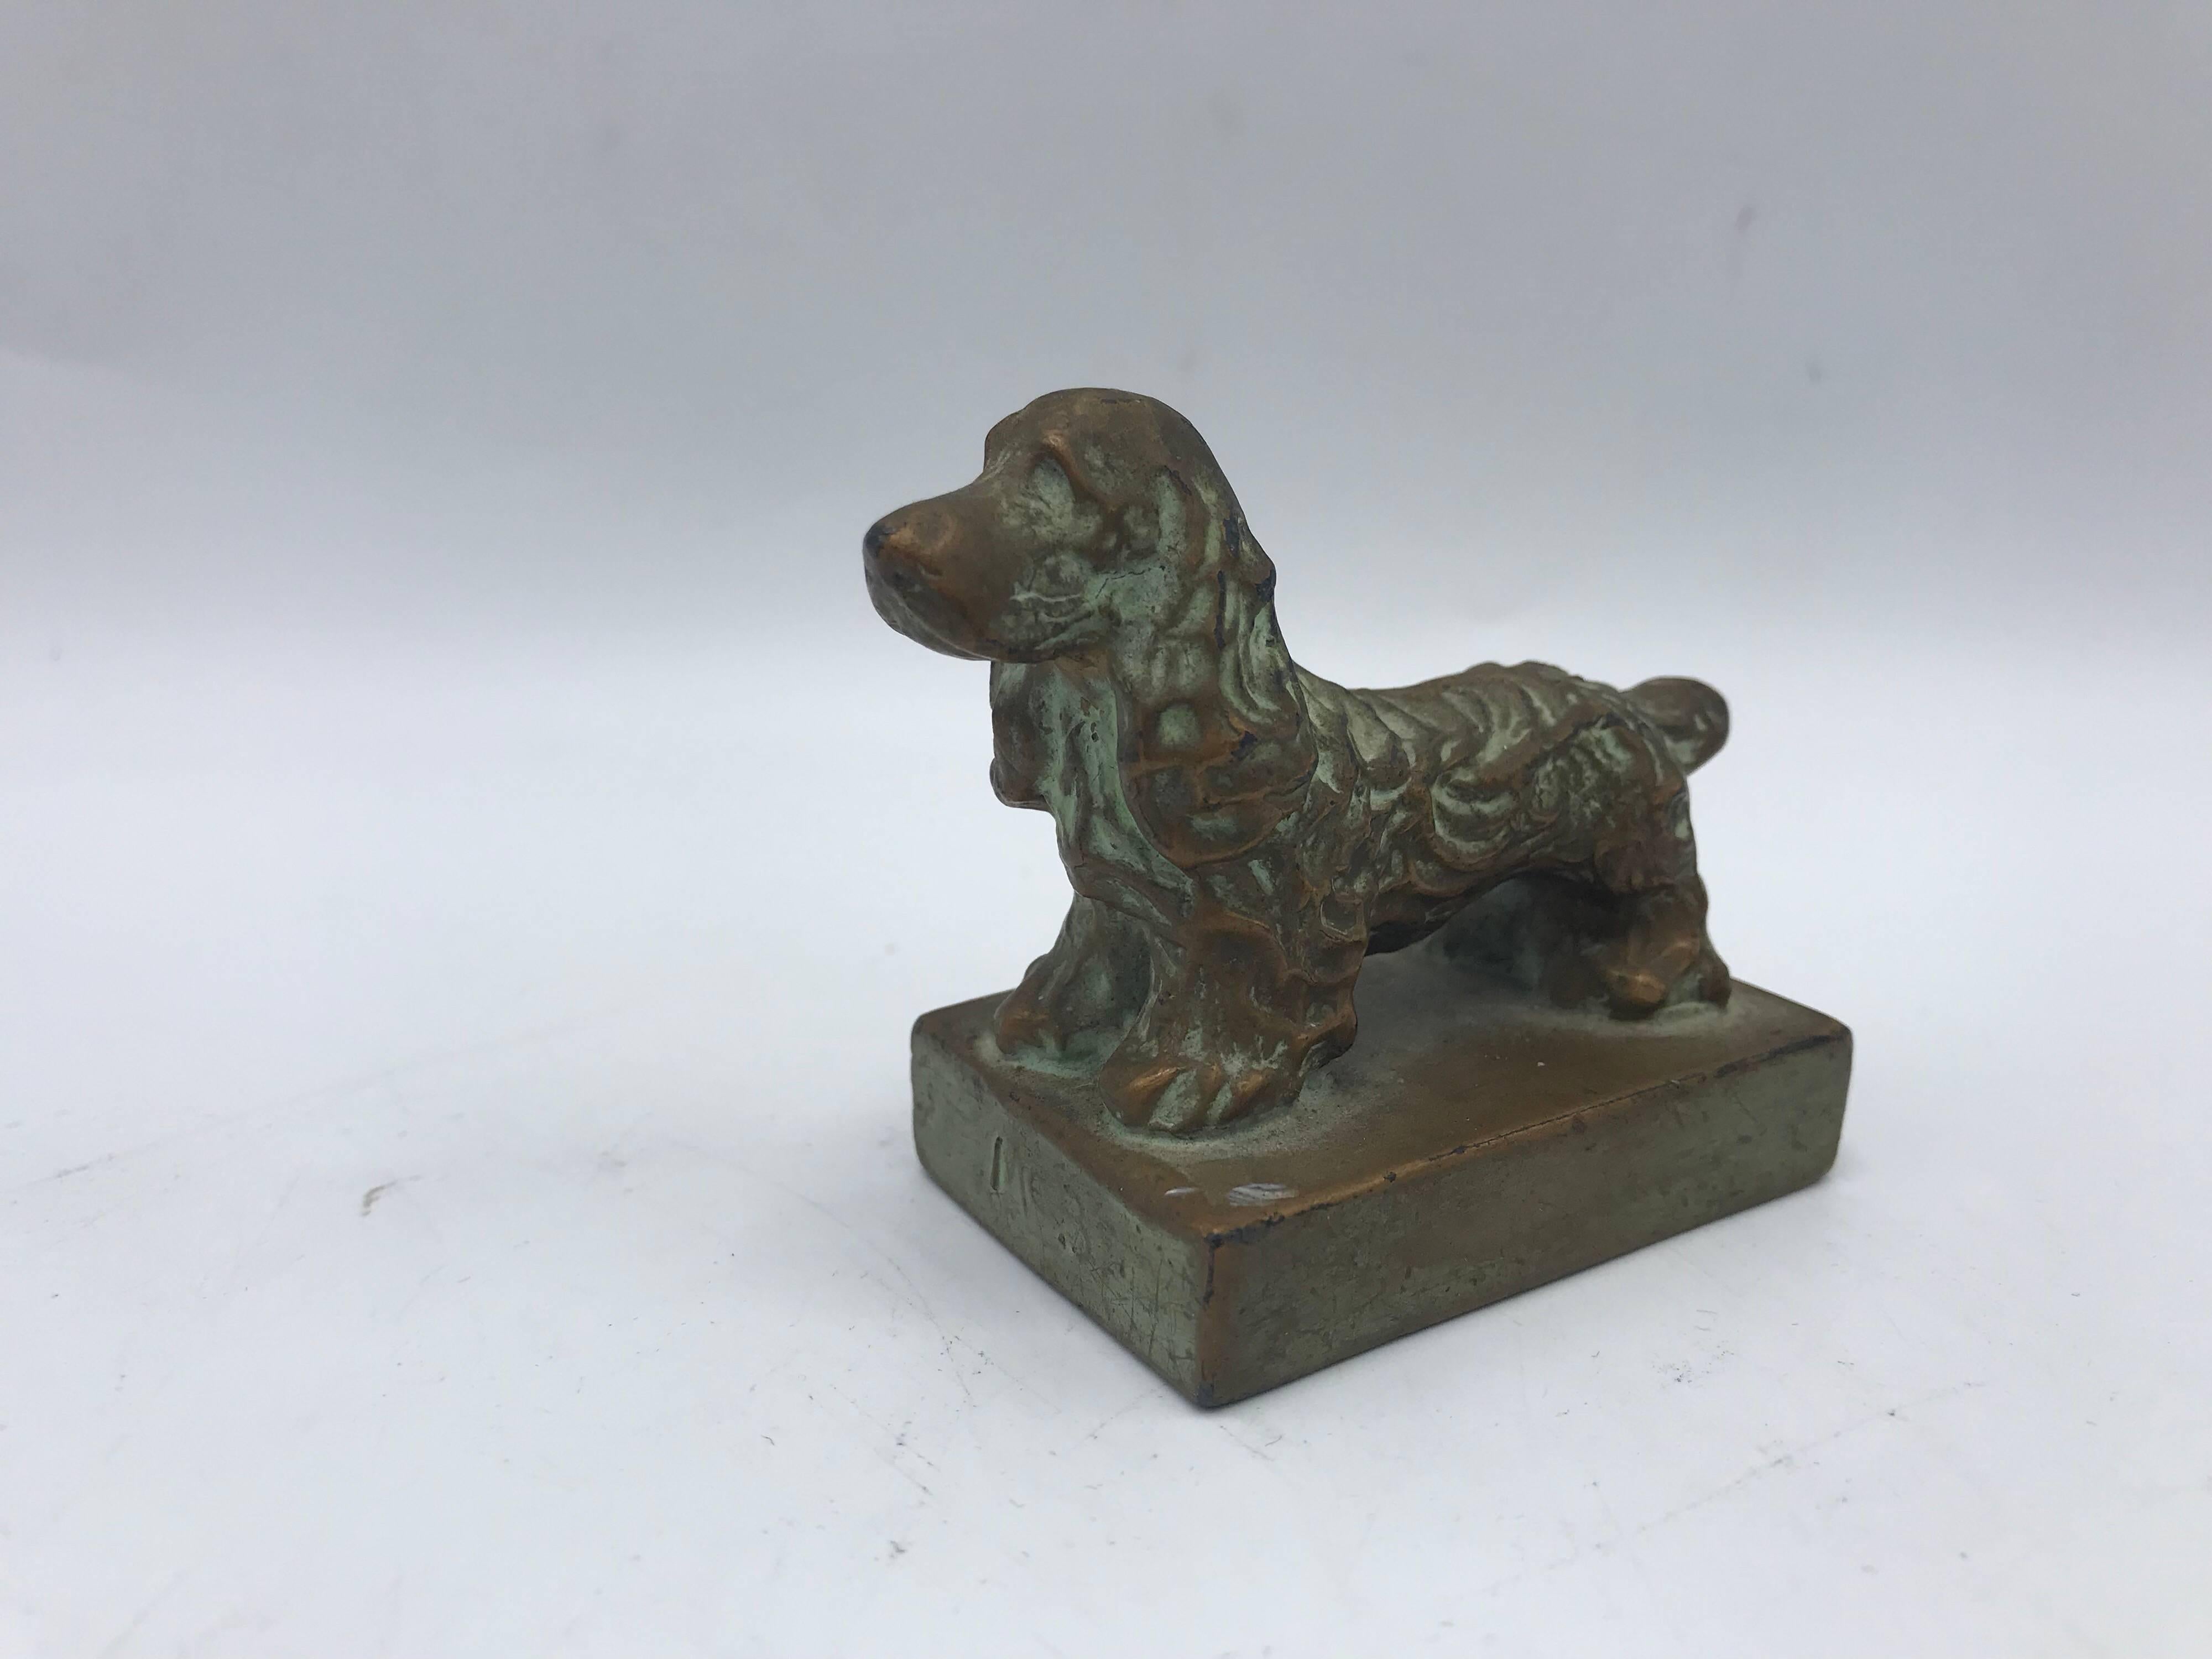 Listed is a beautiful, 1920s solid-bronze, Spaniel dog sculptural paperweight. The perfect addition to any canine collection!